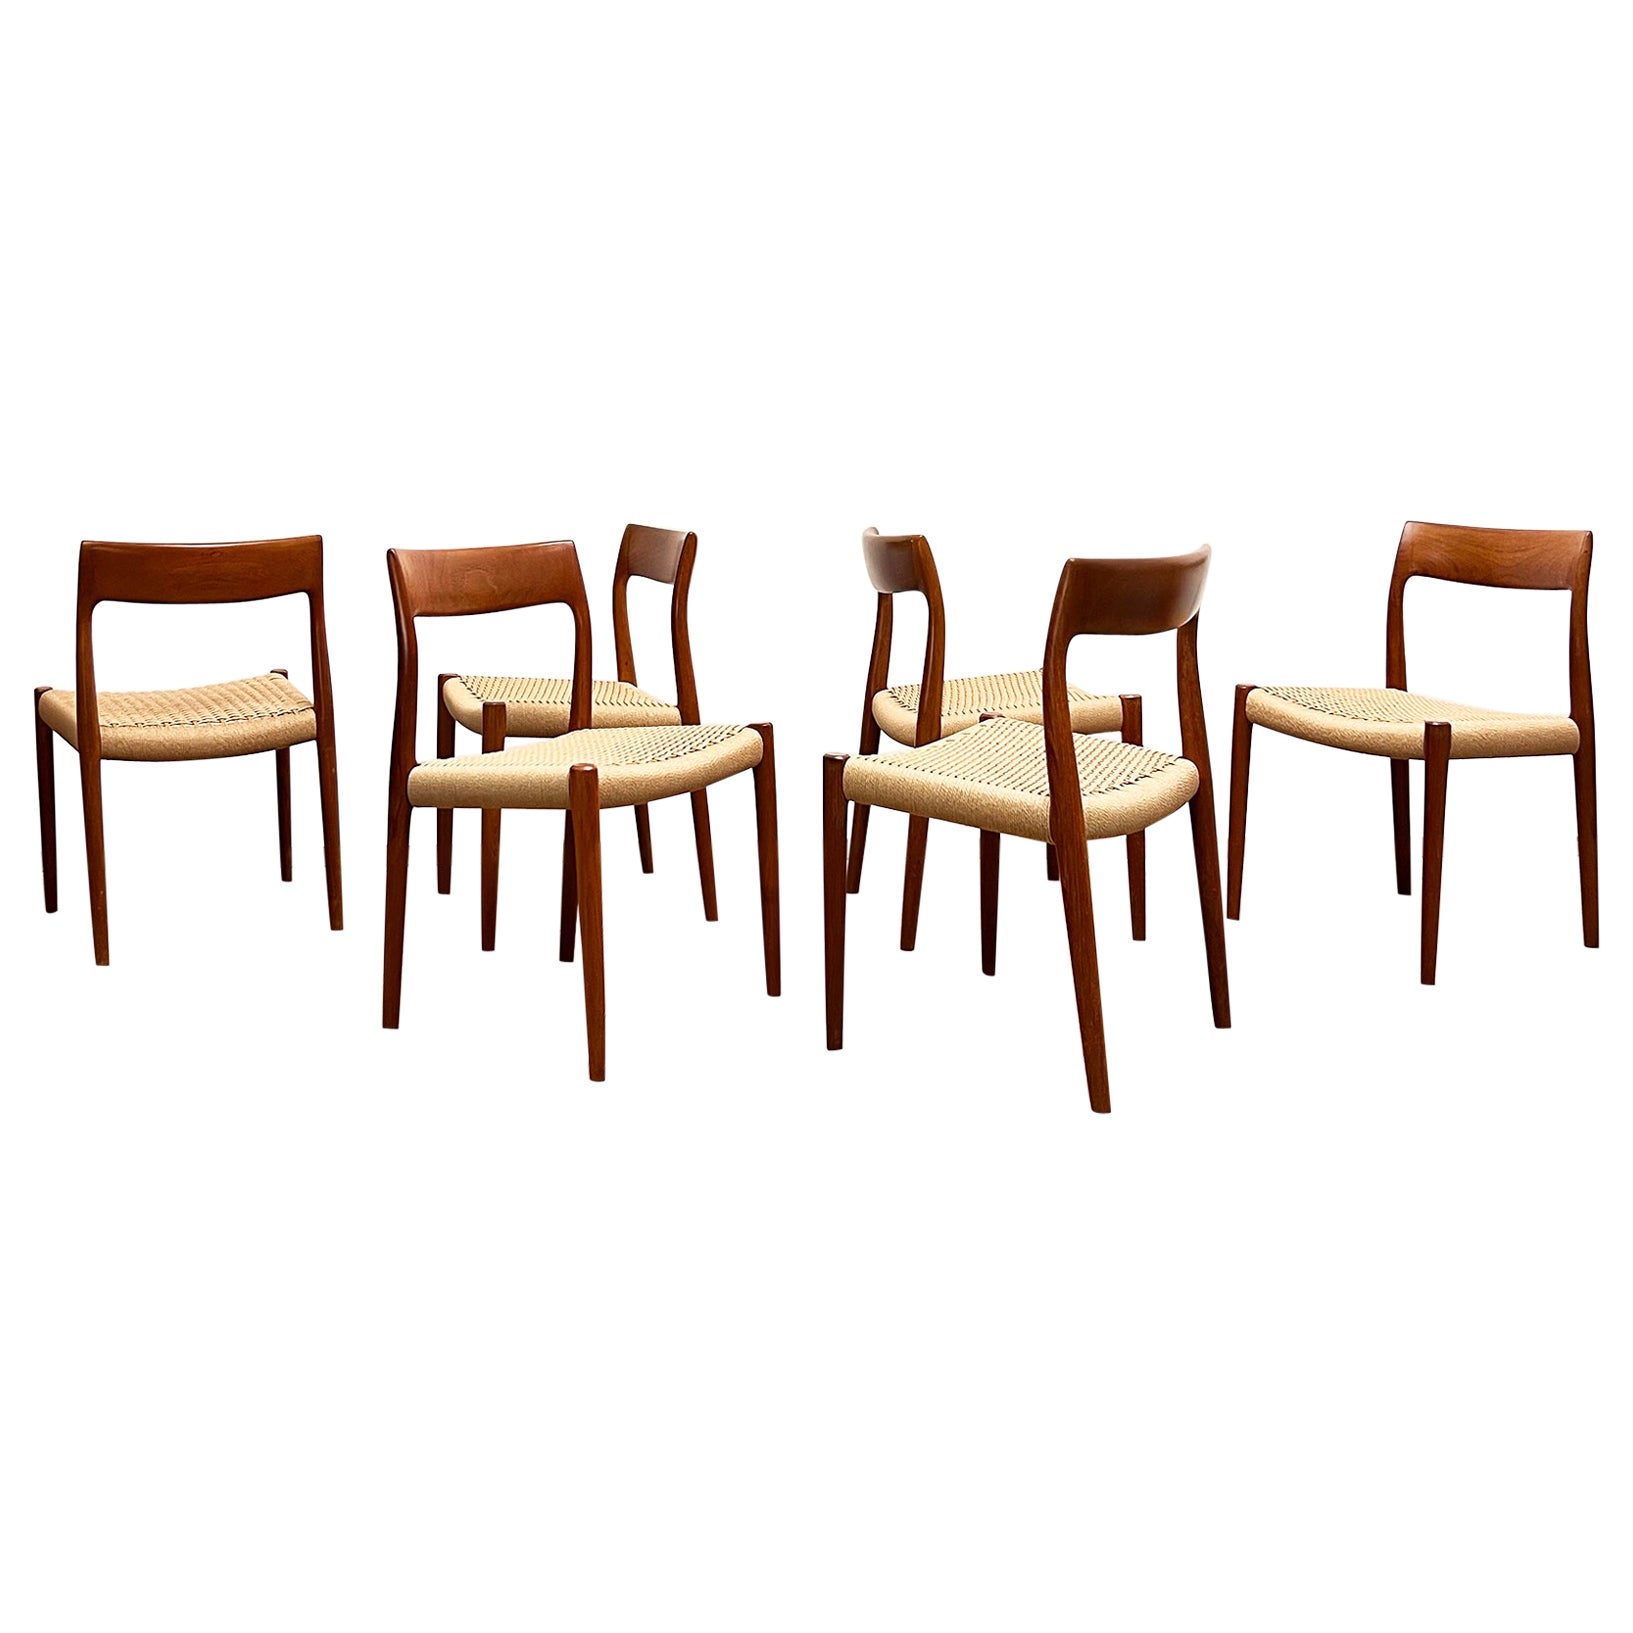 Mid-Century Teak Dining Chairs #77 by Niels O. Møller for J. L. Moller, Set of 6